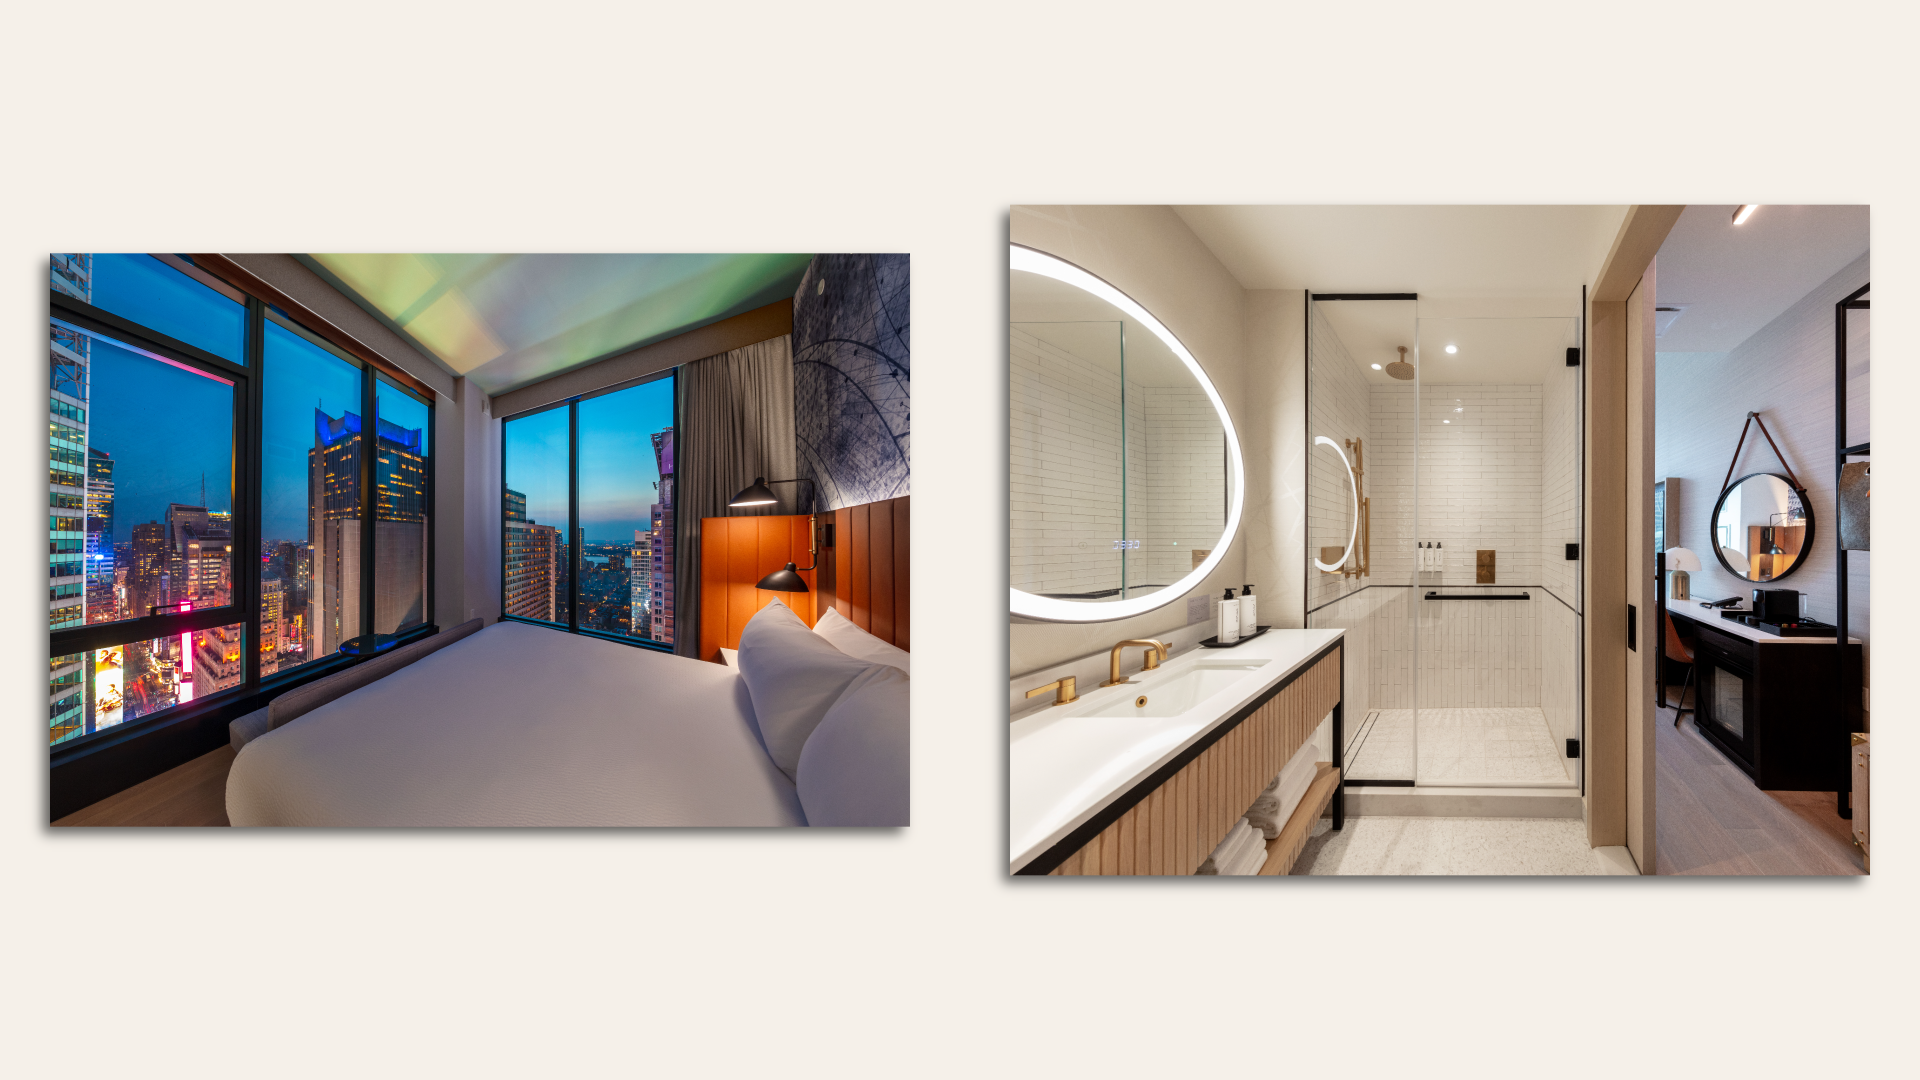 At left, a view of the interior of the "ball drop room" at the Tempo by Hilton Times Square; at right, a sample bathroom from the same hotel. 